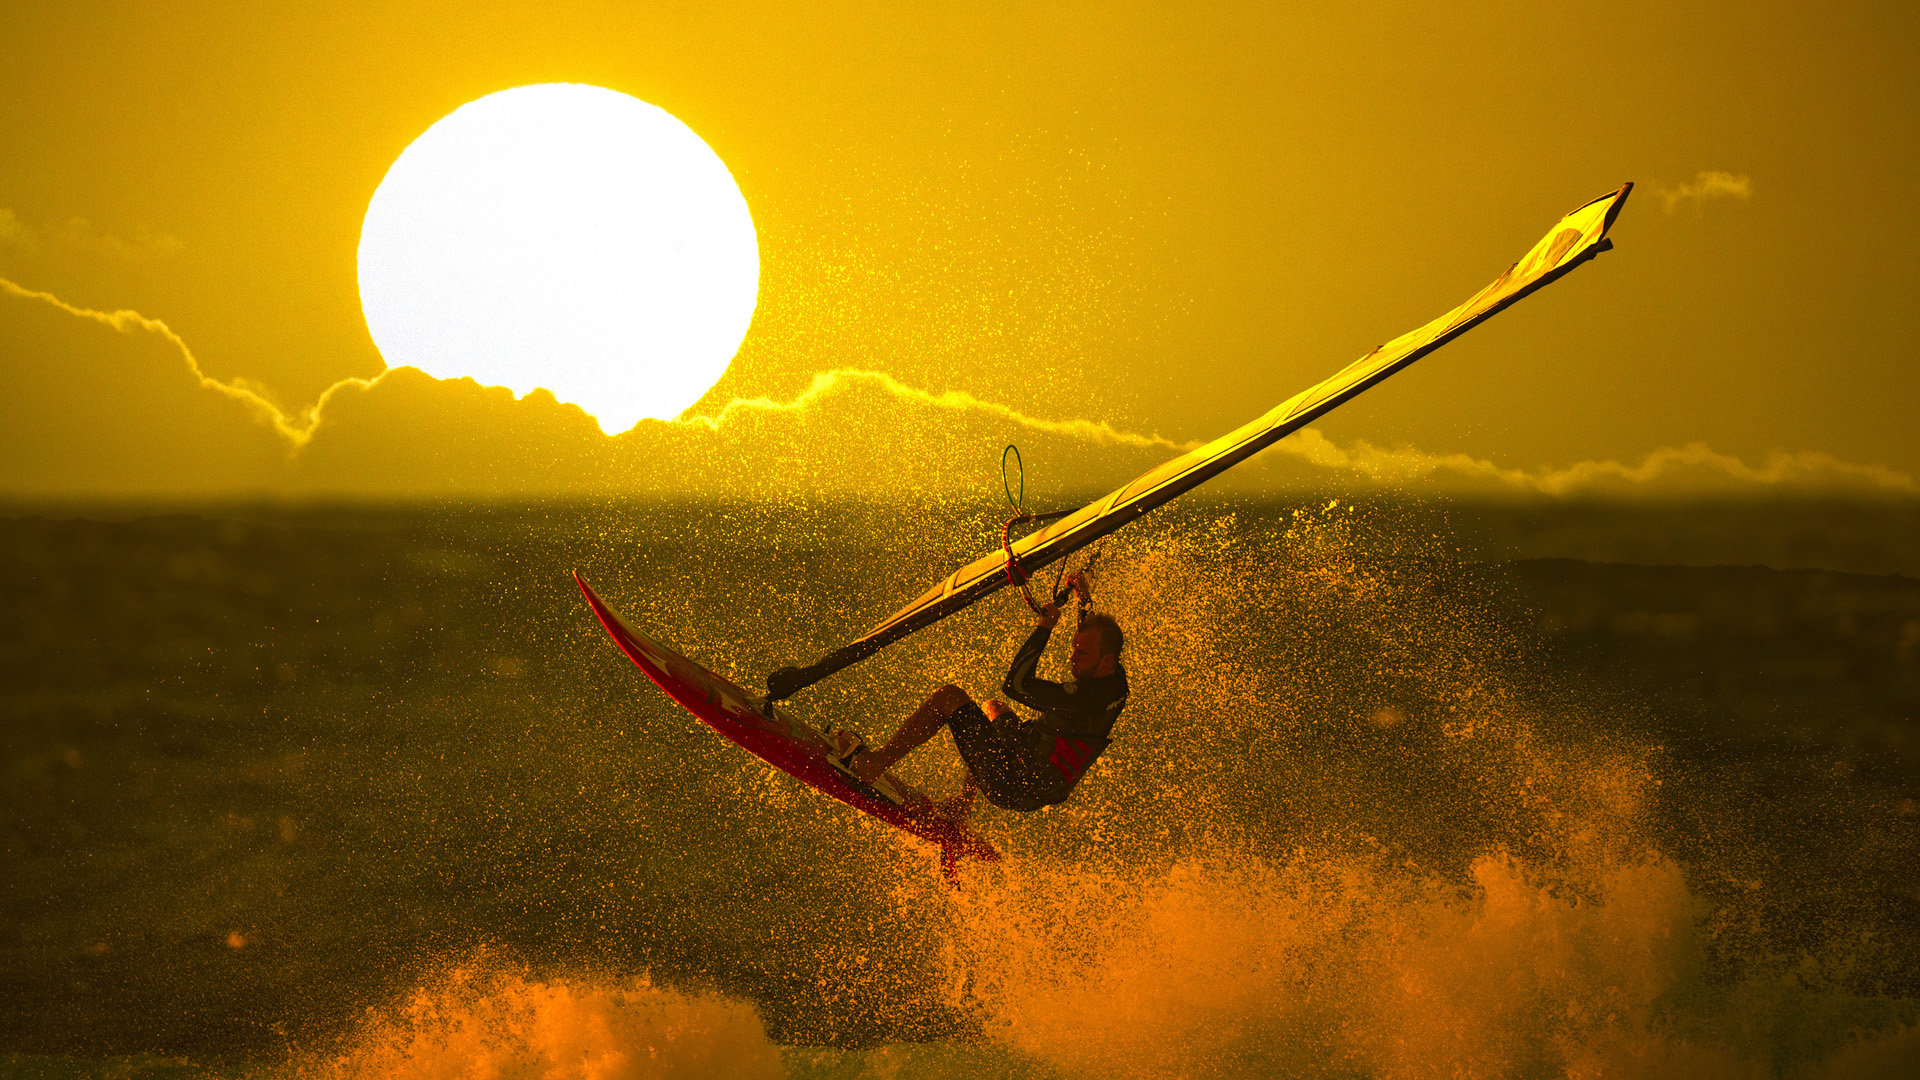 Awesome Windsurfing free background ID:144570 for hd 1920x1080 desktop